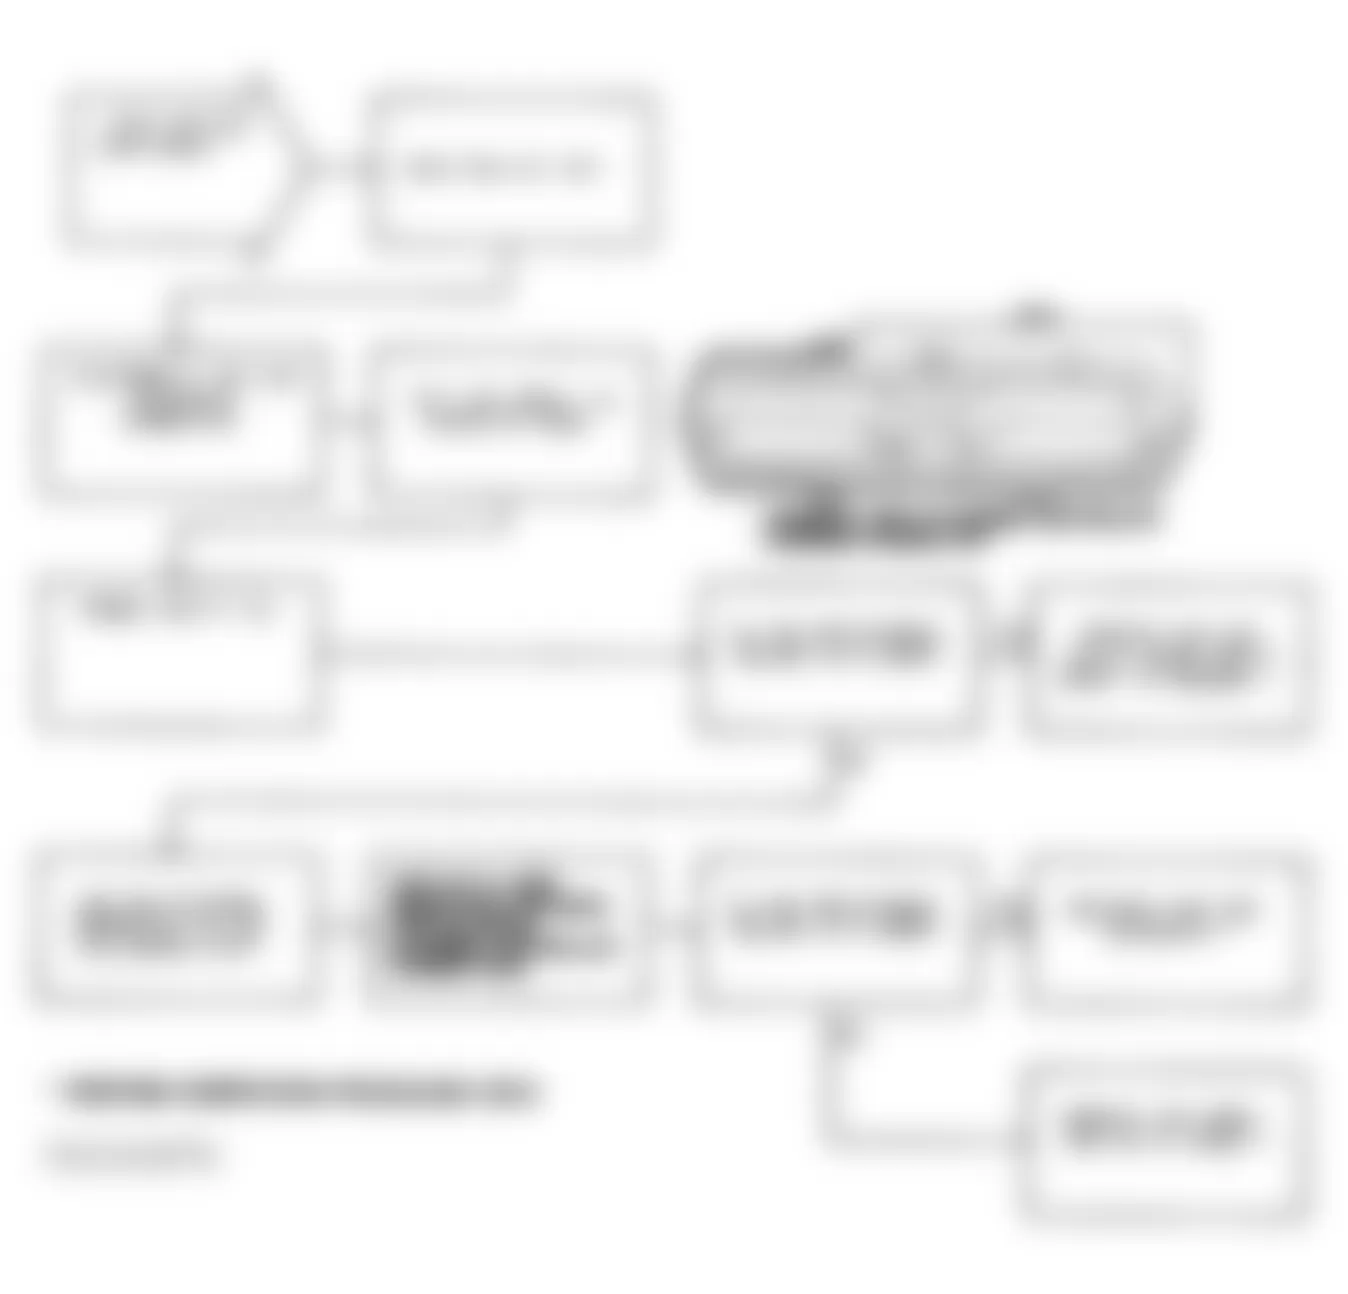 Chrysler New Yorker Fifth Avenue 1991 - Component Locations -  Test DR-22A Code 32: Flowchart (3 of 3)